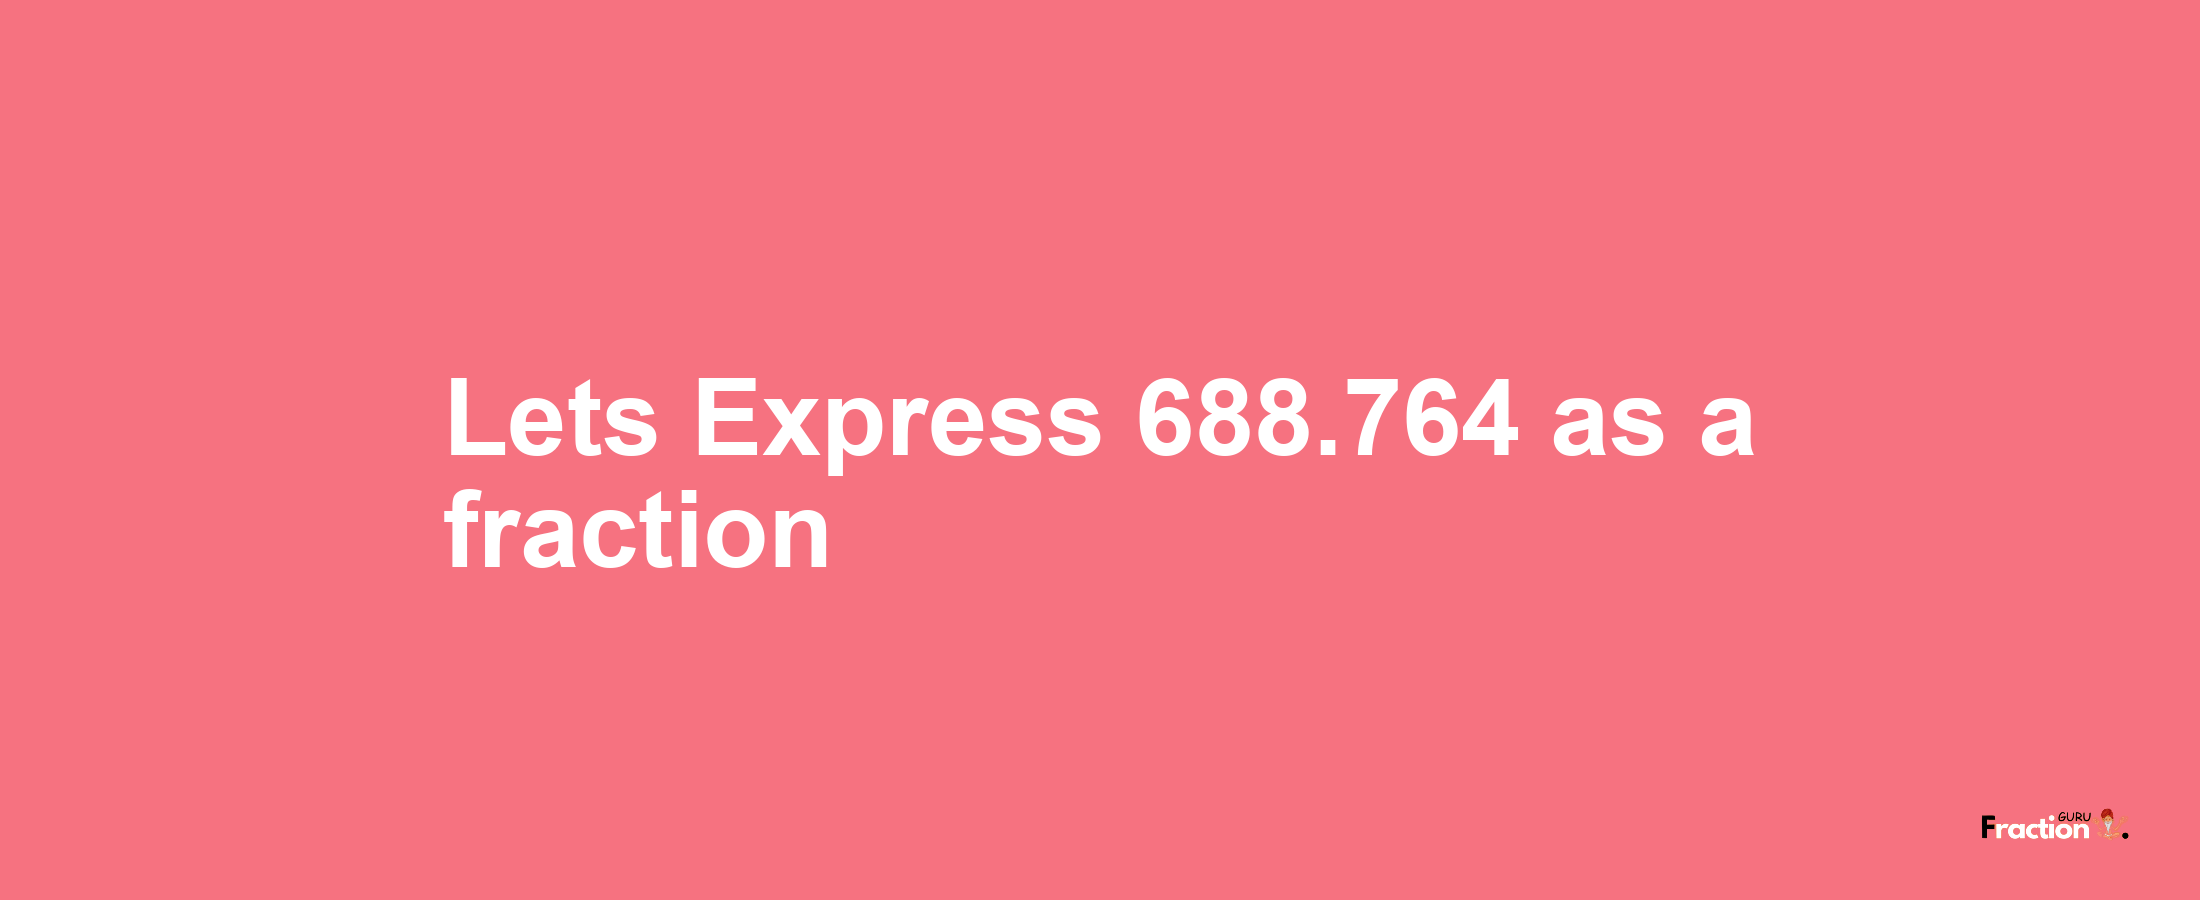 Lets Express 688.764 as afraction